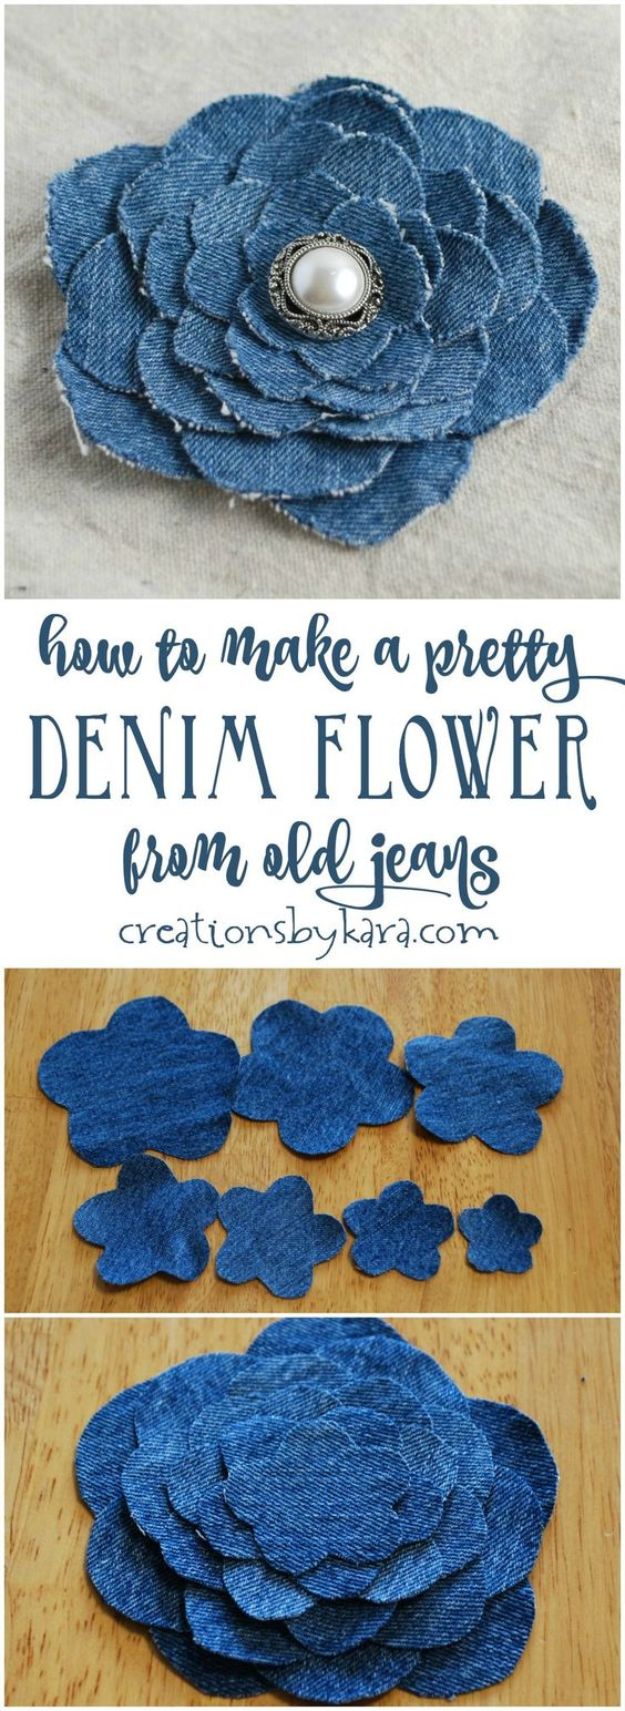 Blue Jean Upcycles - Denim Flower From Old Jeans - Ways to Make Old Denim Jeans Into DIY Home Decor, Handmade Gifts and Creative Fashion - Transform Old Blue Jeans into Pillows, Rugs, Kitchen and Living Room Decor, Easy Sewing Projects for Beginners #sewing #diy #crafts #upcycle